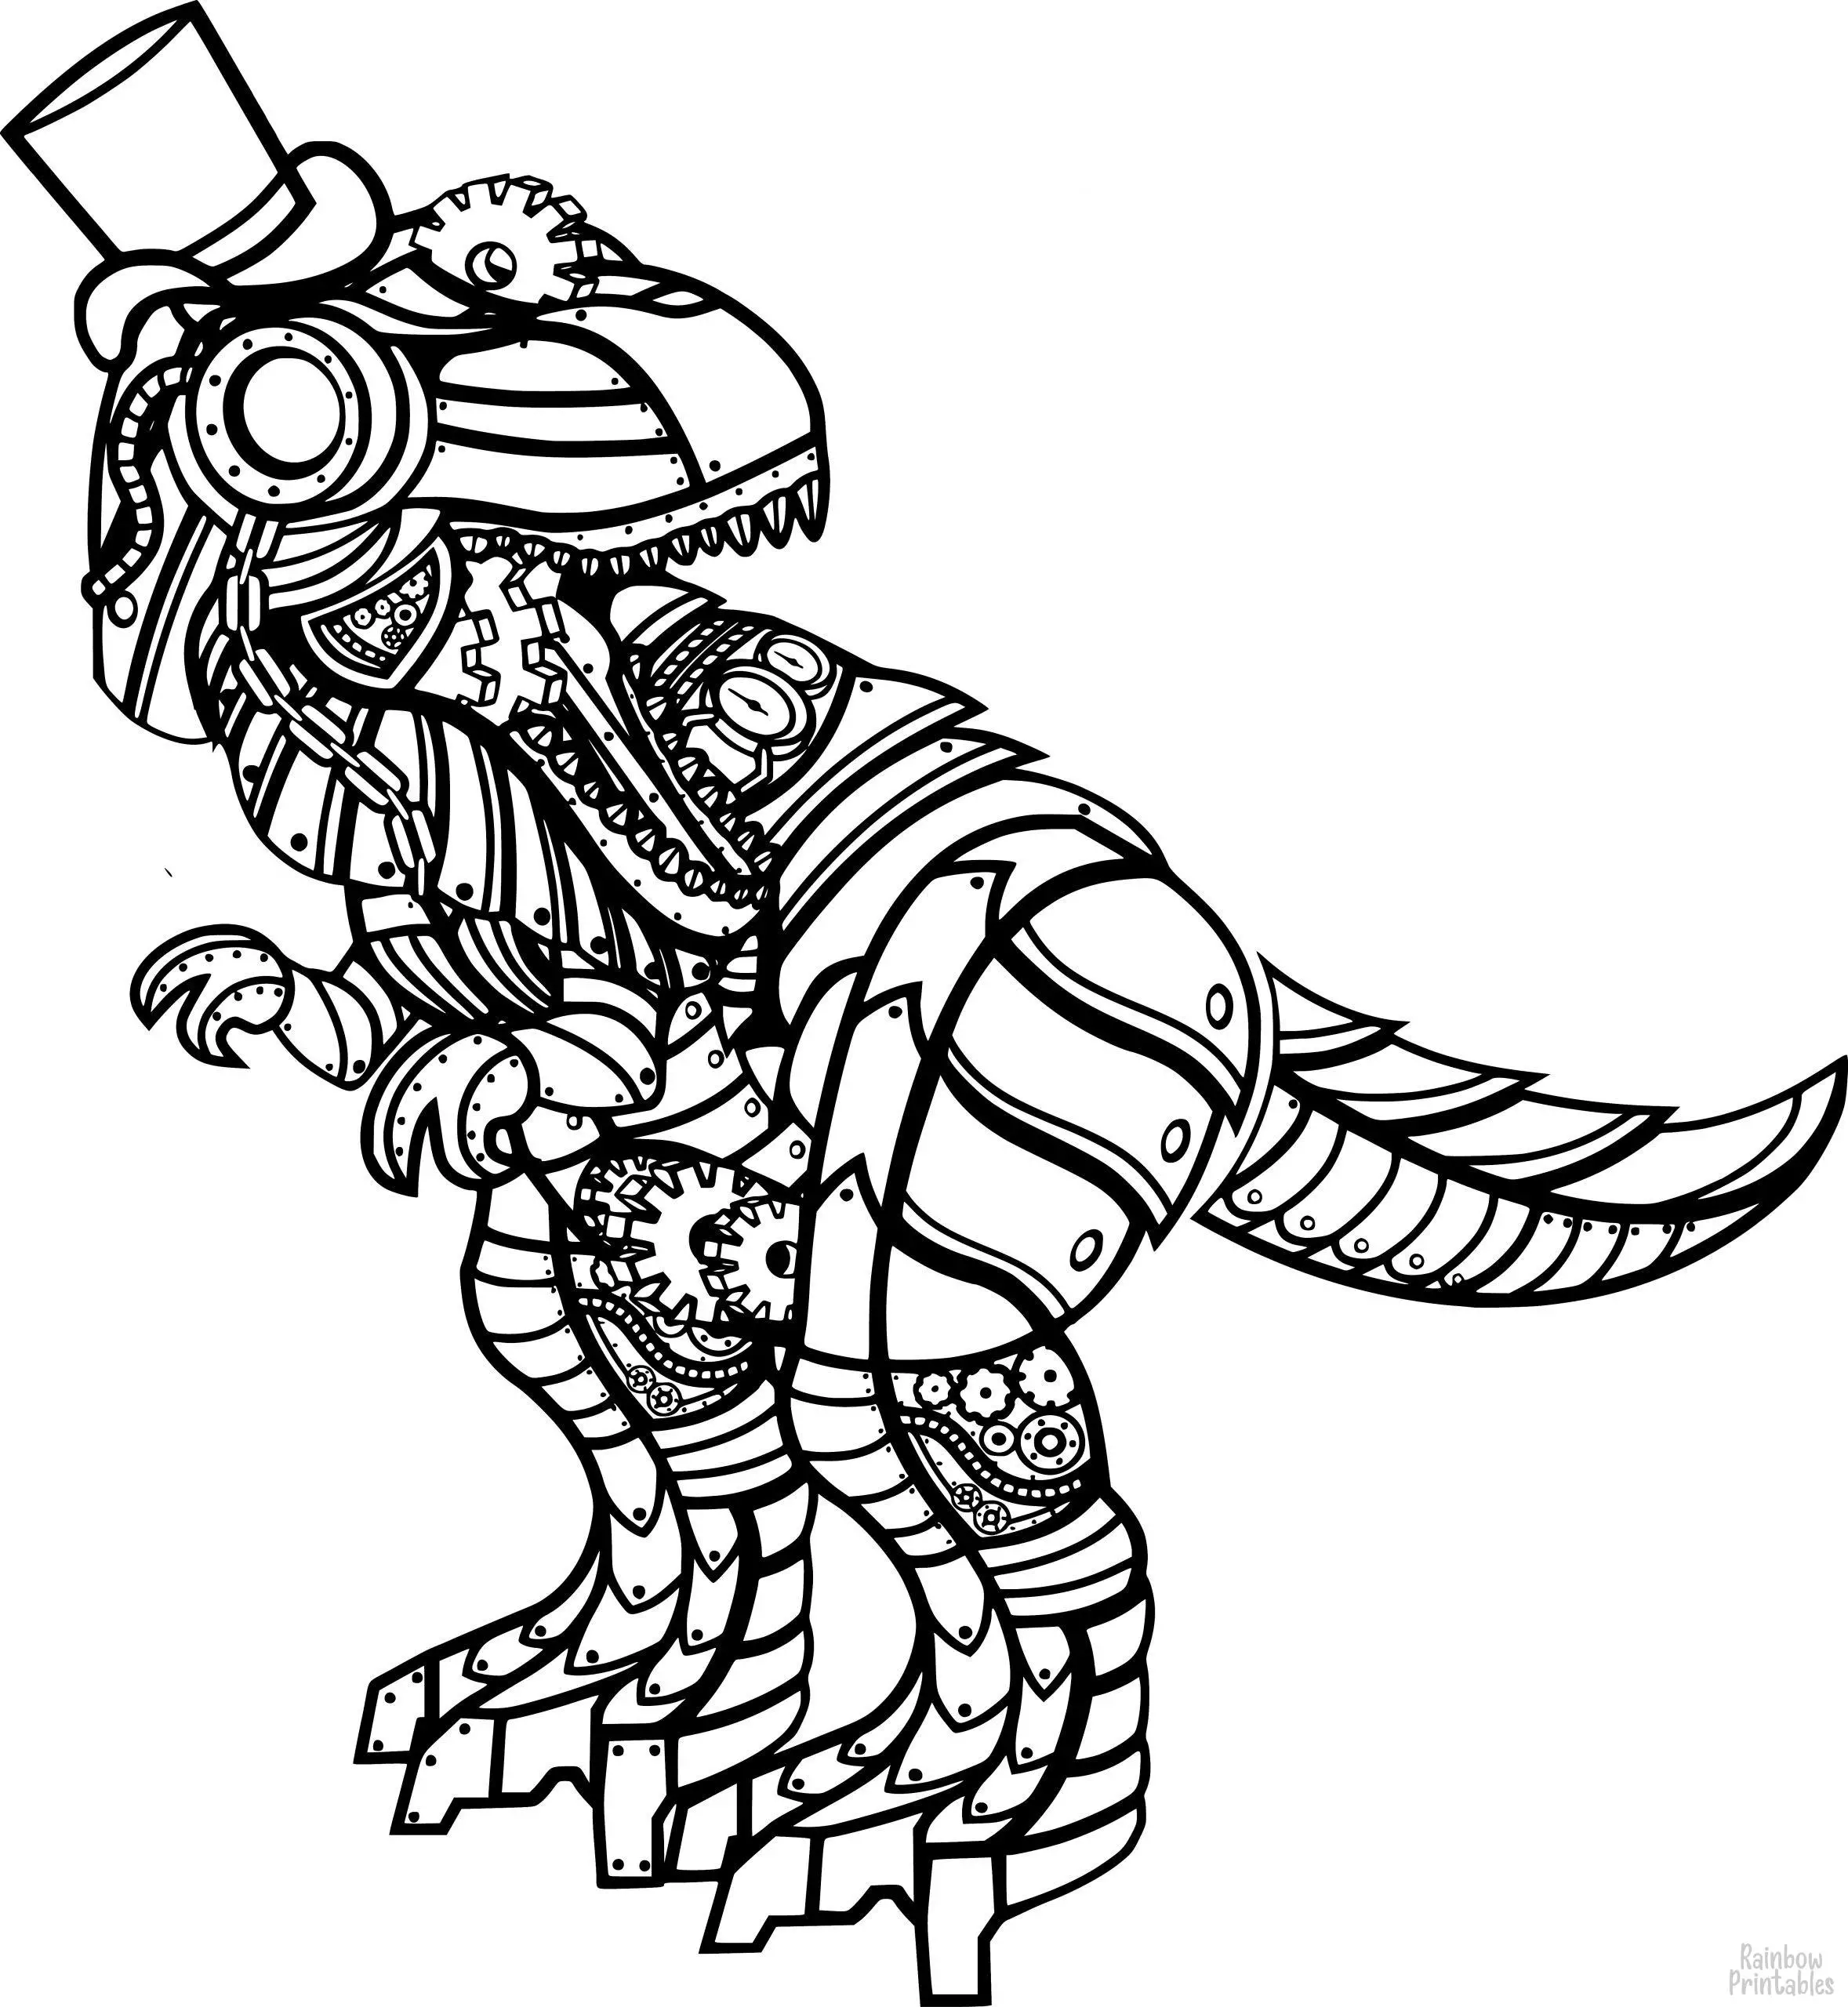 ROBOT Trex T REX Top Hat Steampunk Style Coloring Pages for Kids Adults Art Activities Line Art